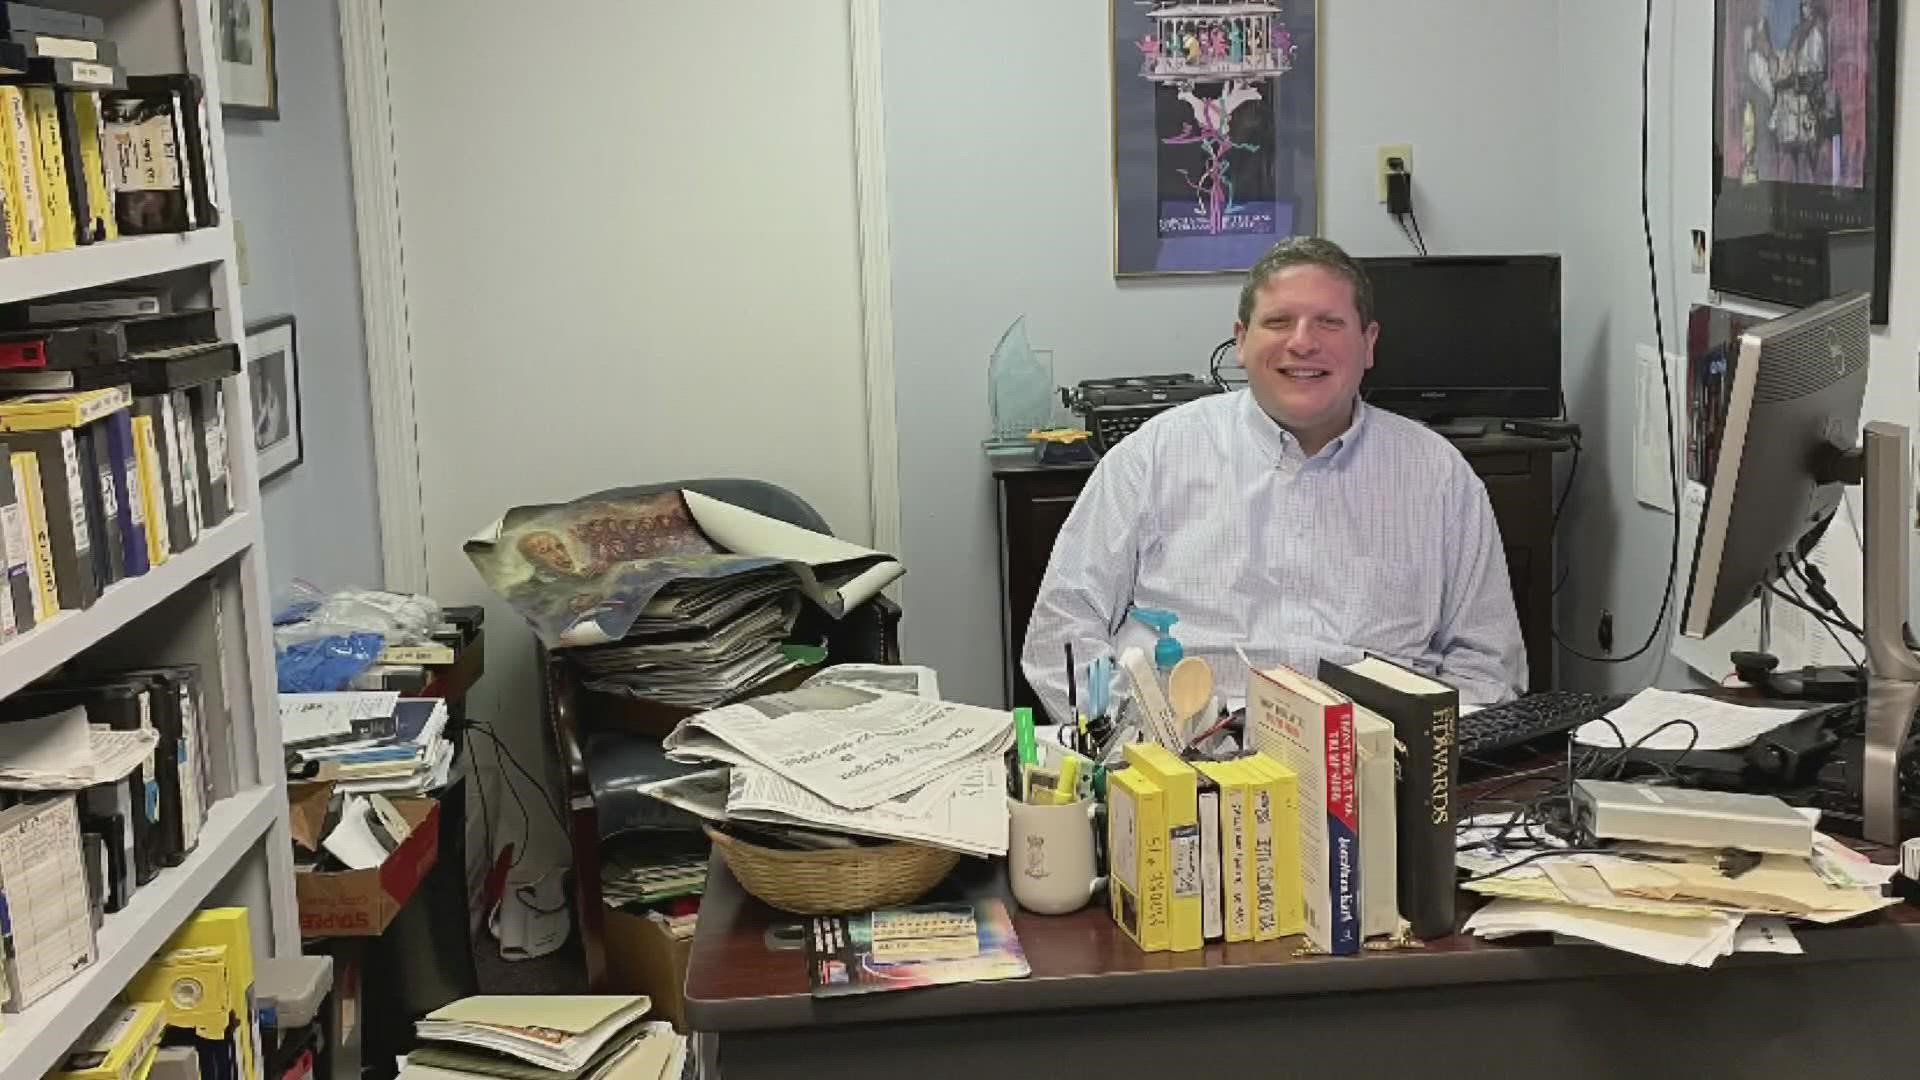 Dominic Massa has worked at WWL for 27 years and the place just won't be the same without him.